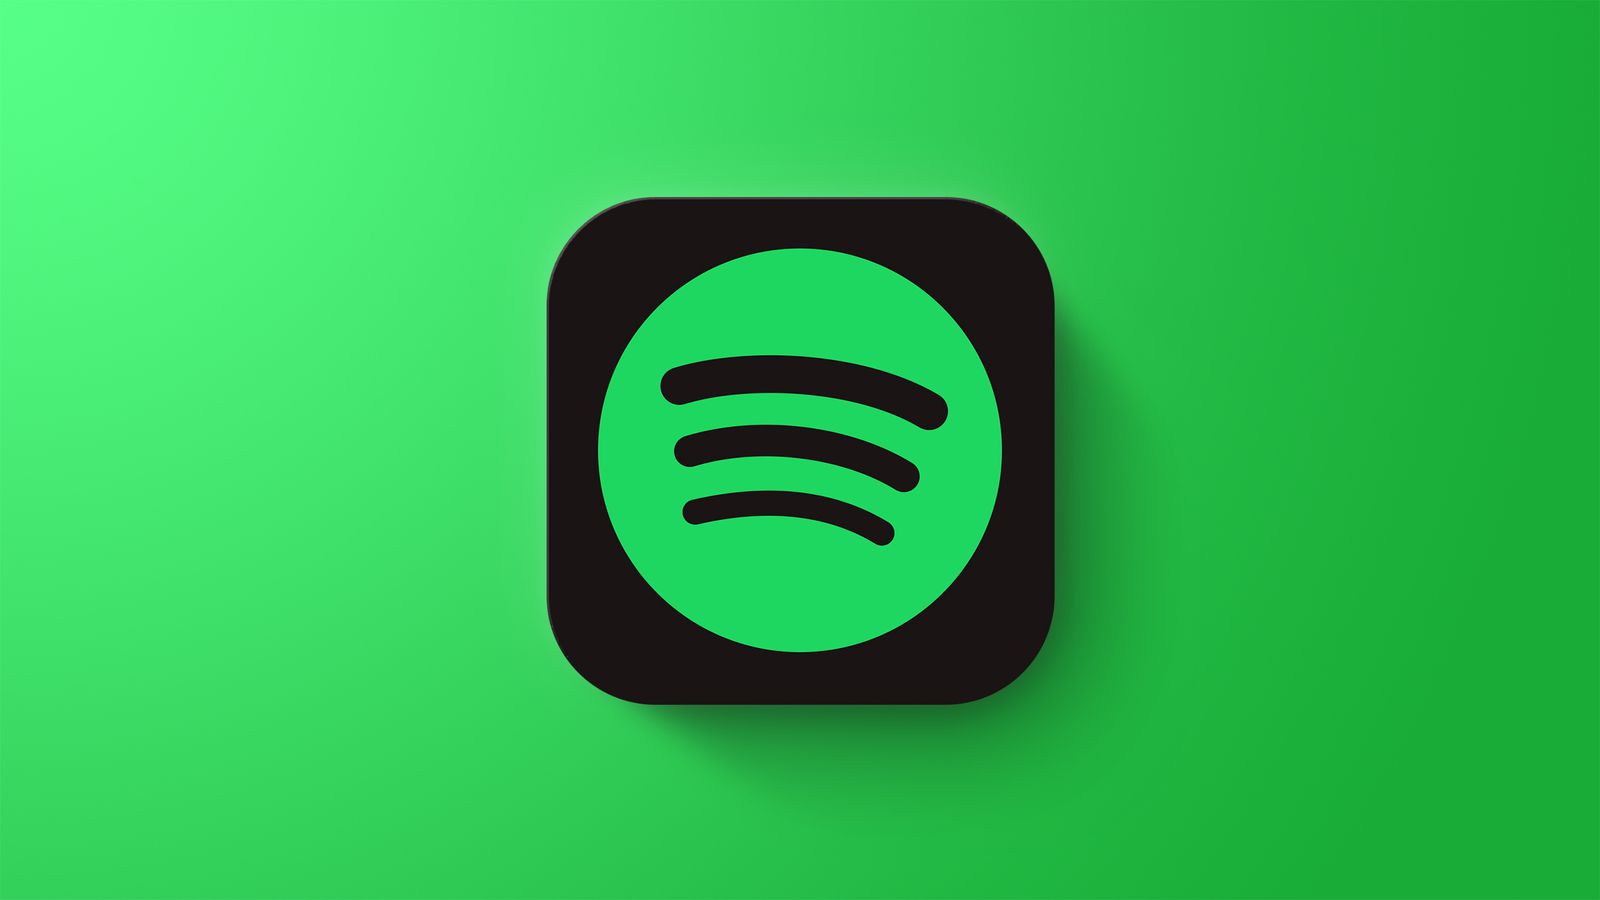 Spotify May Soon Level Up Audio Quality with Anticipated 'Supremium' Plan